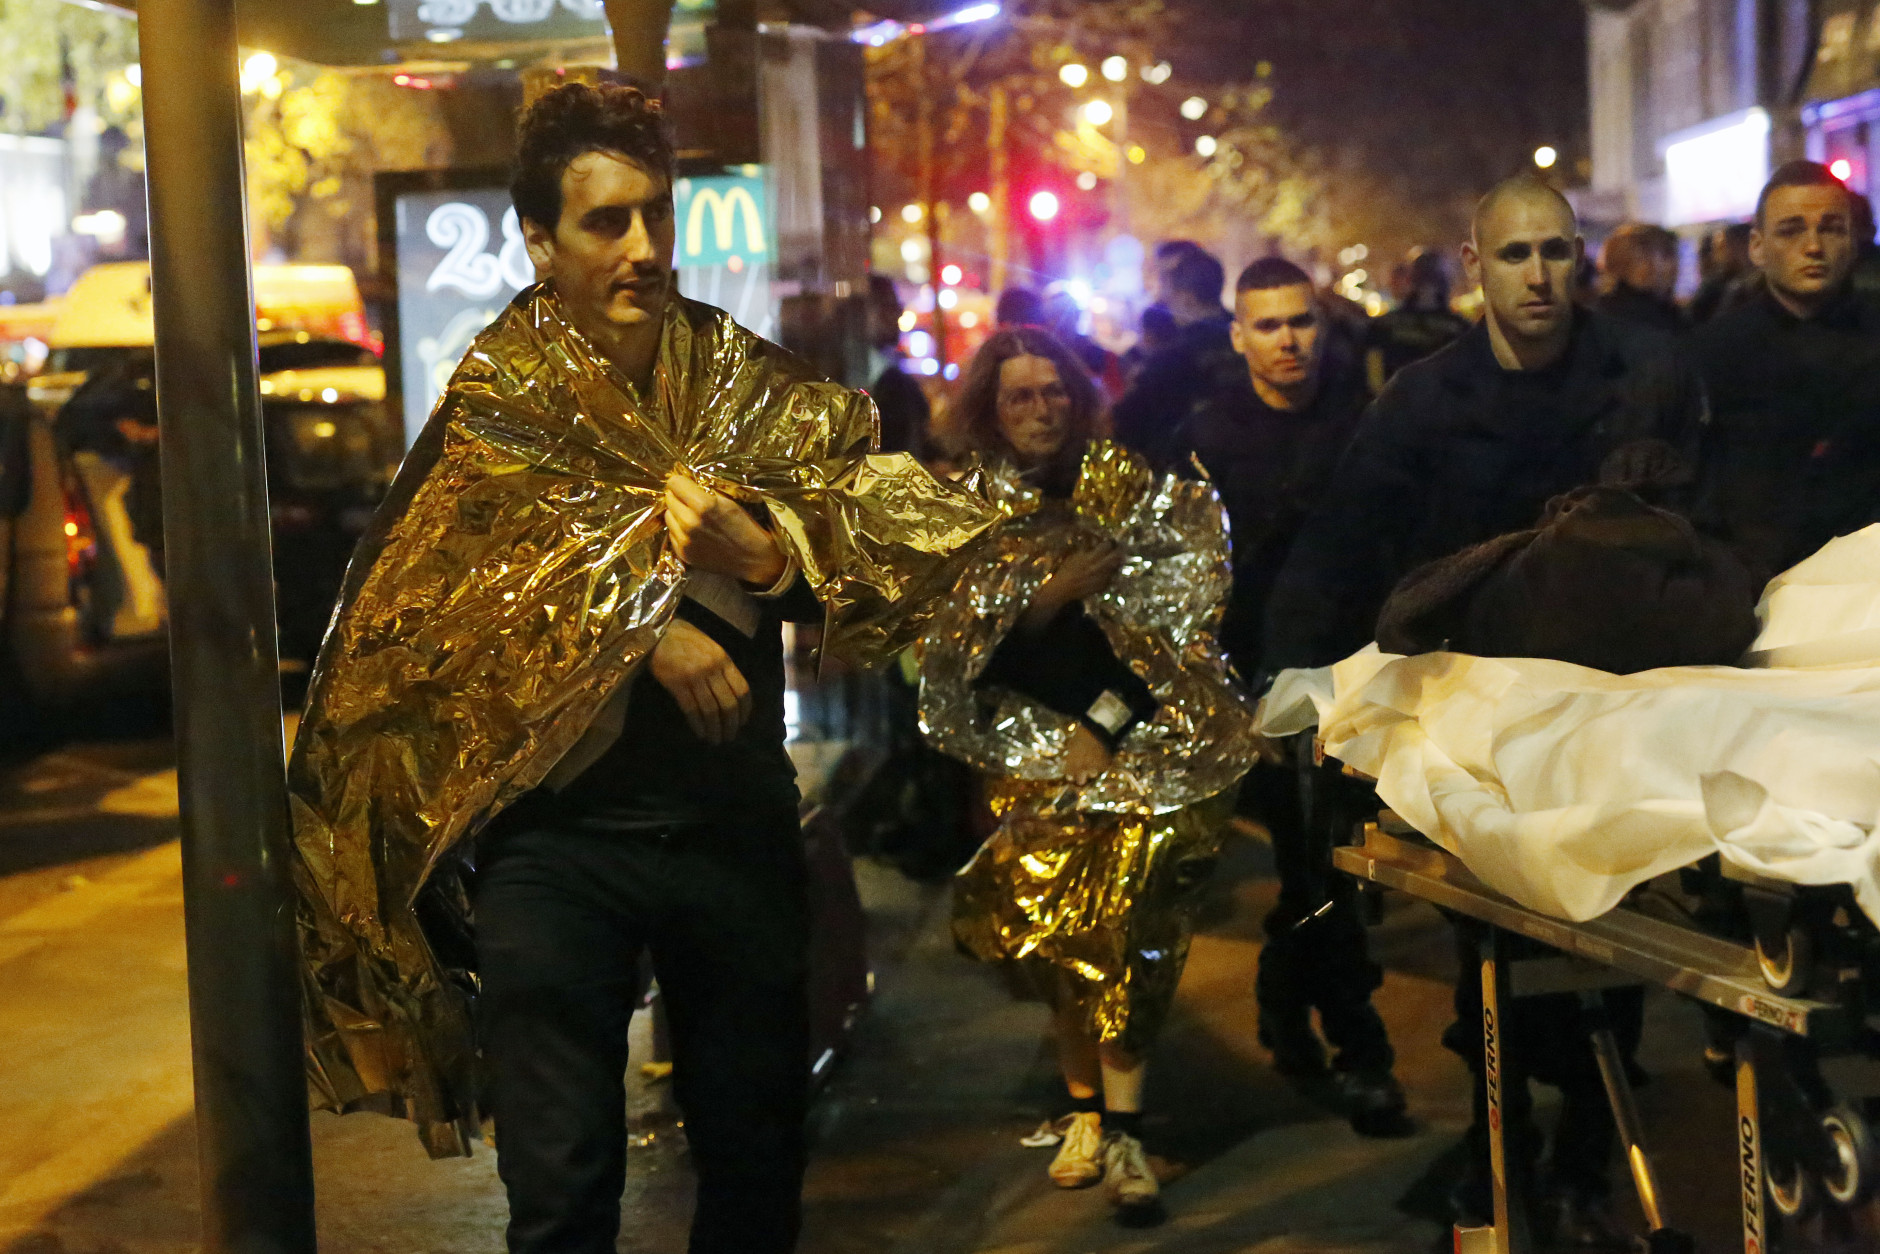 Victims walk away outside the Bataclan theater in Paris, Friday Nov. 13, 2015. Well over 100 people were killed  in a series of shooting and explosions explosions. French President Francois Hollande declared a state of emergency and announced that he was closing the country's borders. (AP Photo/Jerome Delay)